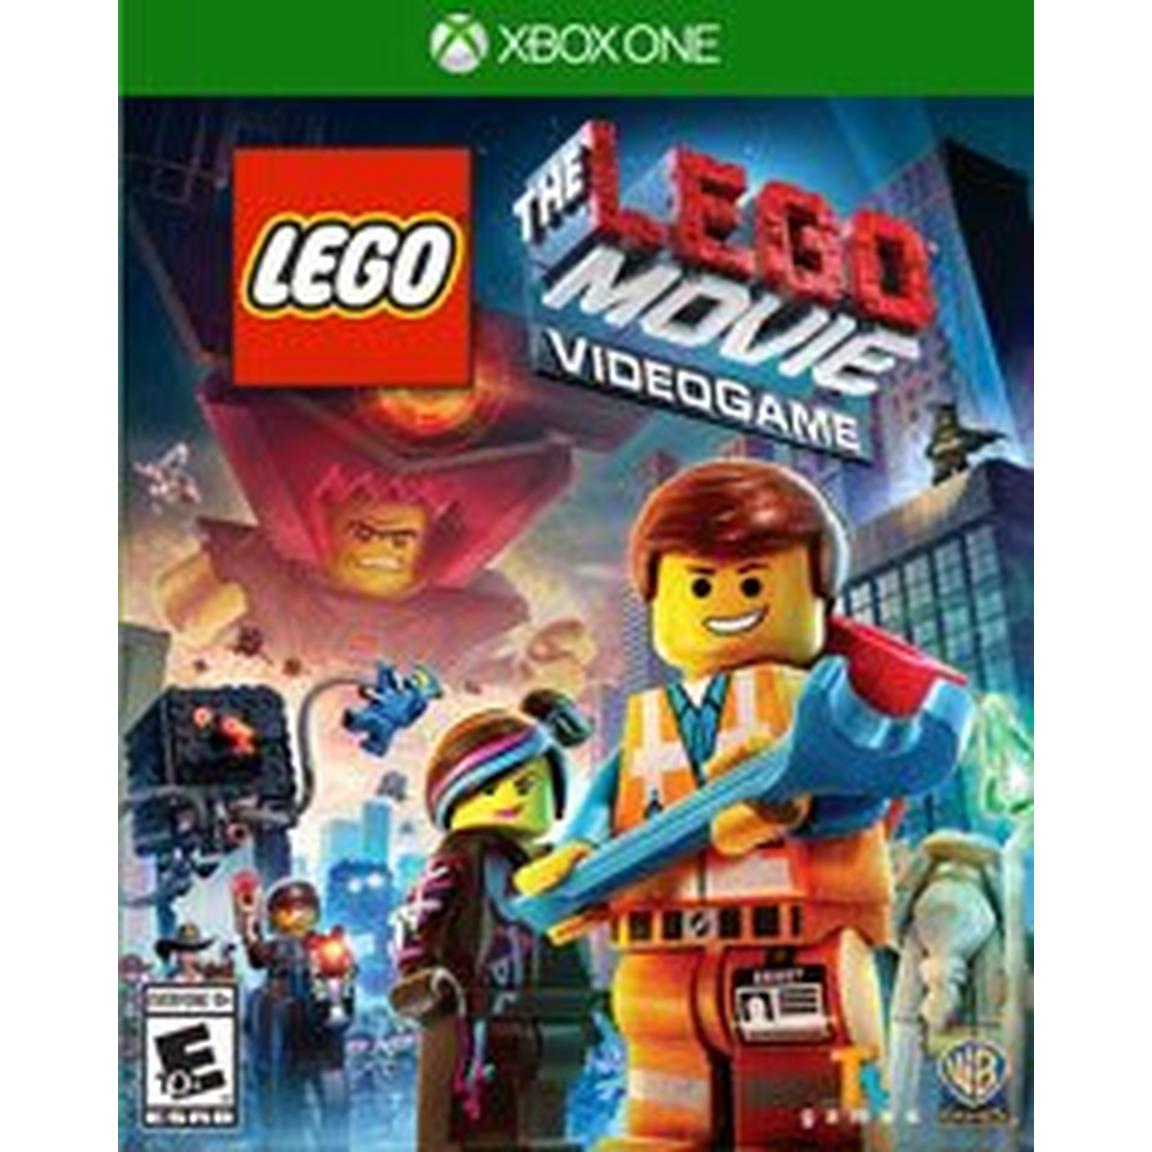 LEGO Movie Videogame - Xbox One, Pre-Owned -  Warner Bros. Interactive Entertainment